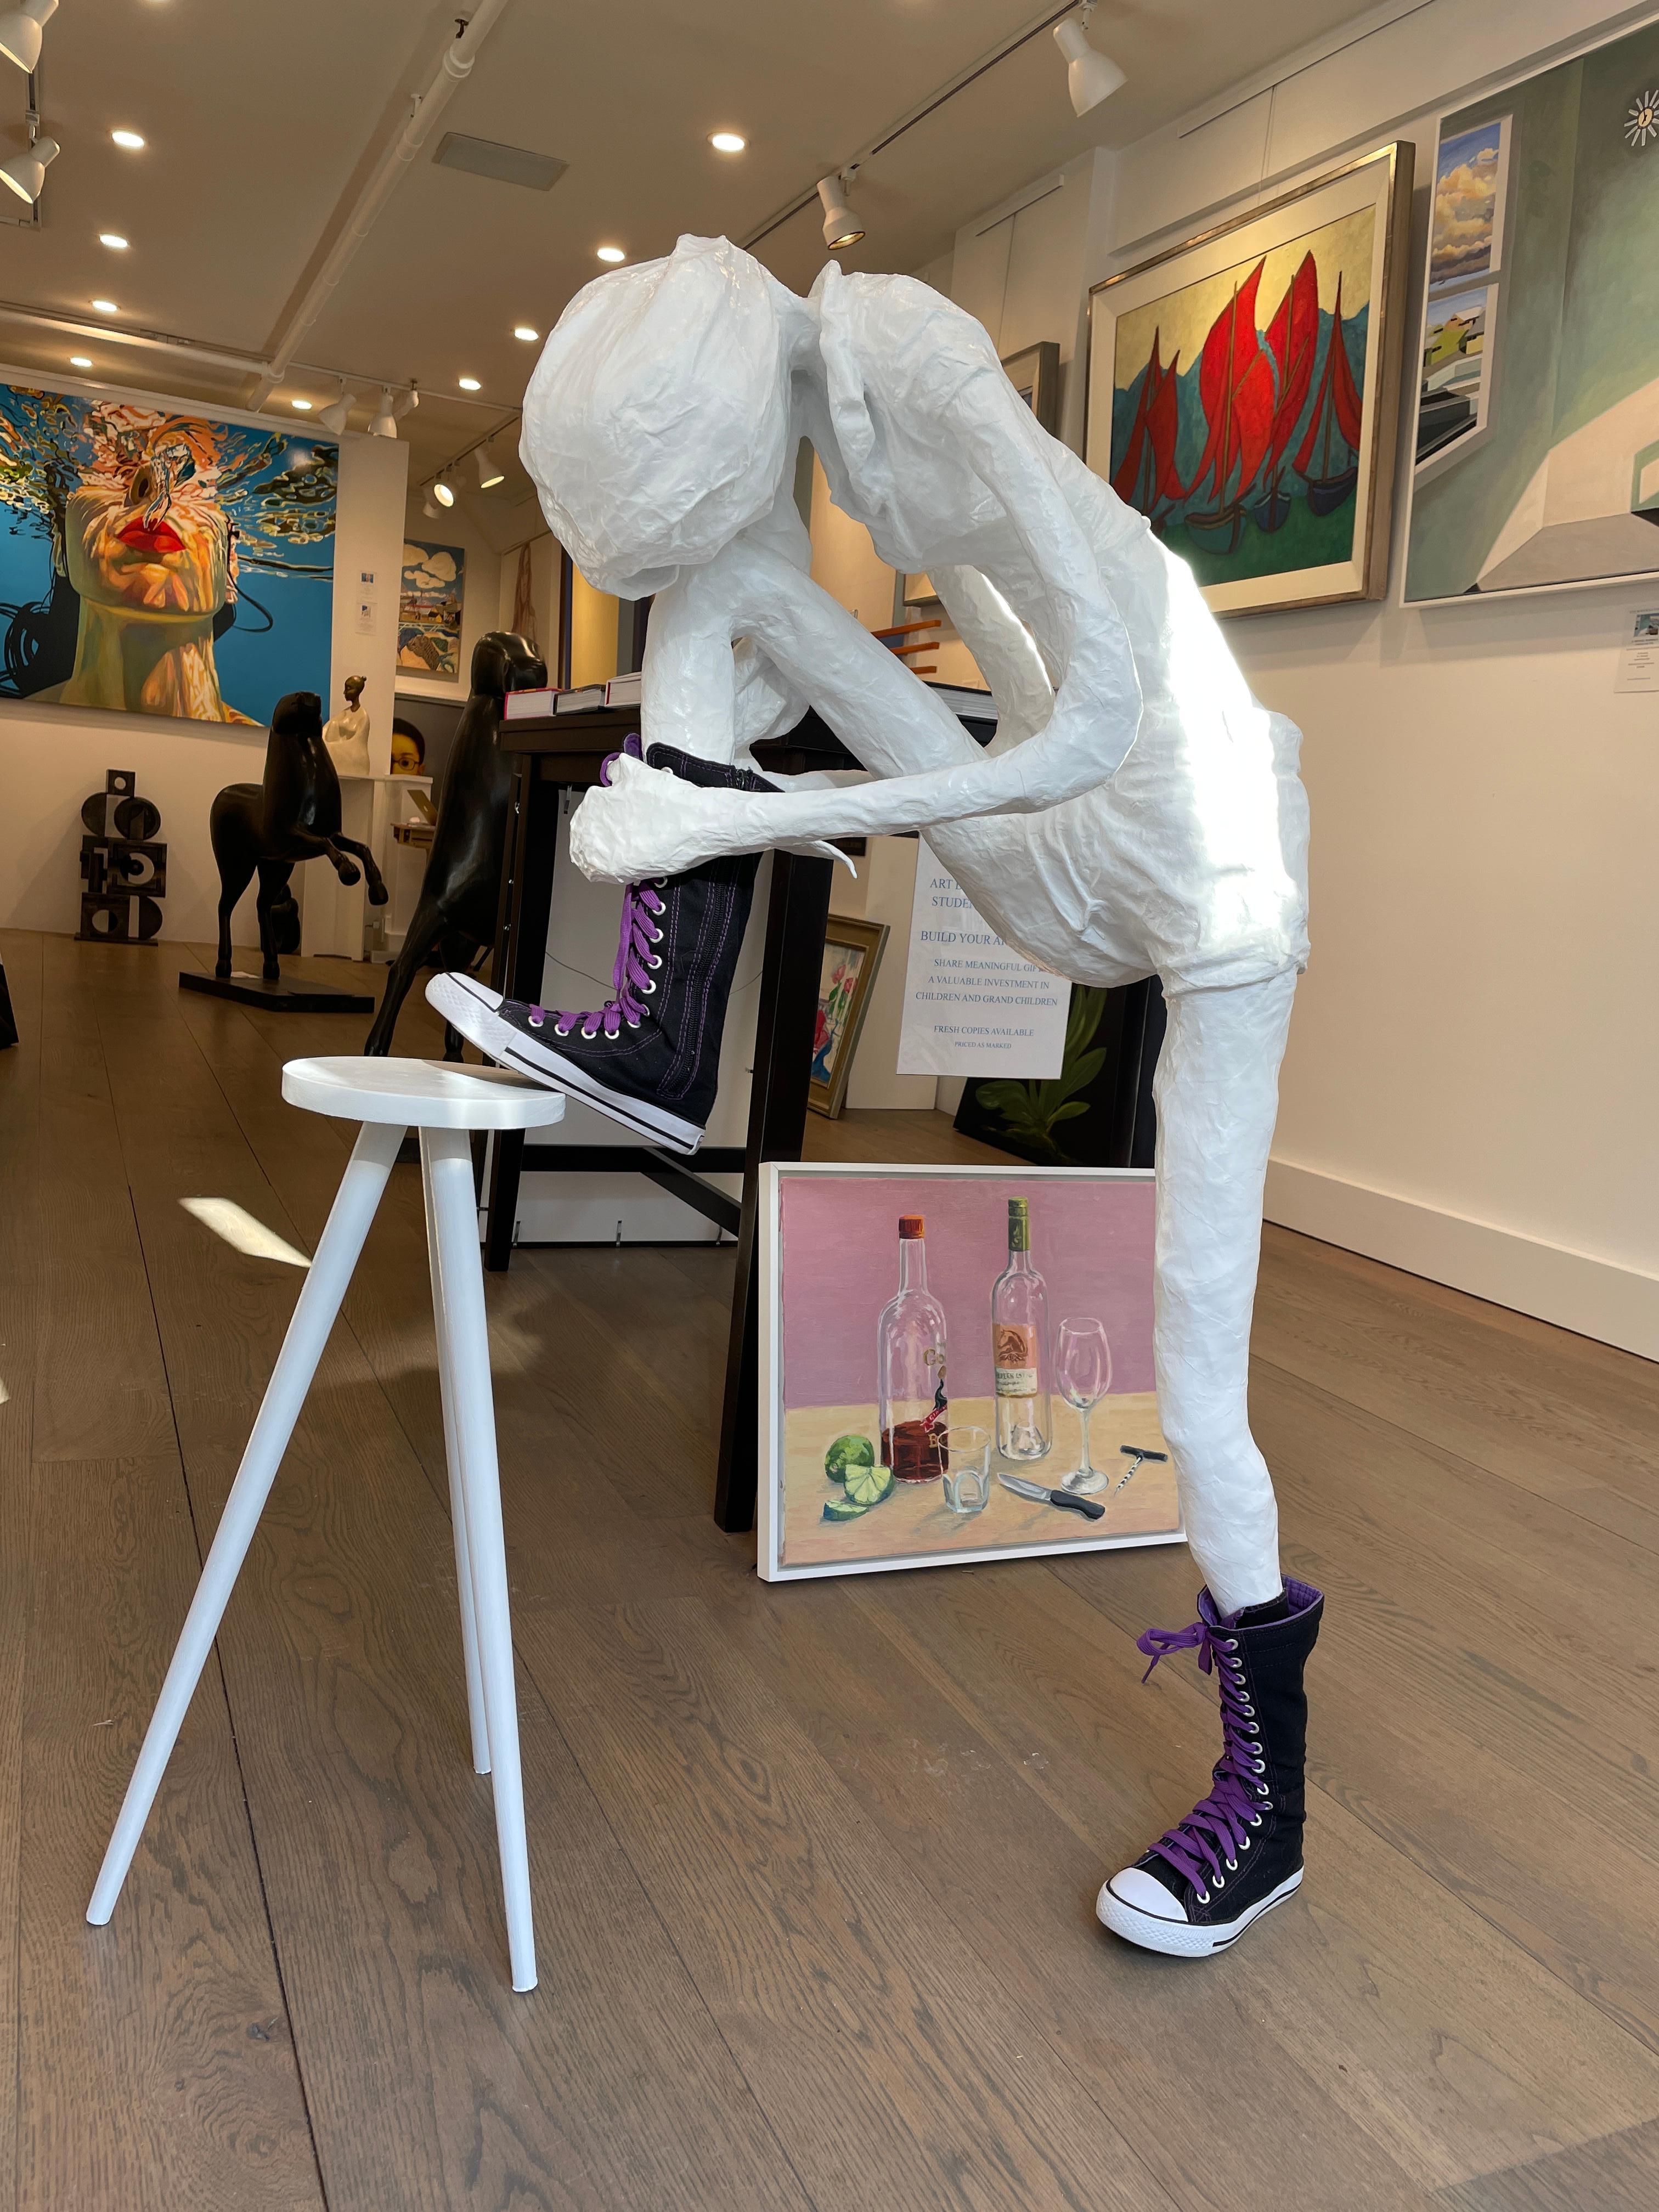 Girl Tying Her Shoe is a free-standing floor sculpture by American artist, Bret Reilly.  Reilly is a true 21st century Renaissance man. His sculptures, songs, and furniture designs attest to a brilliant and creative mind. The present sculpture,